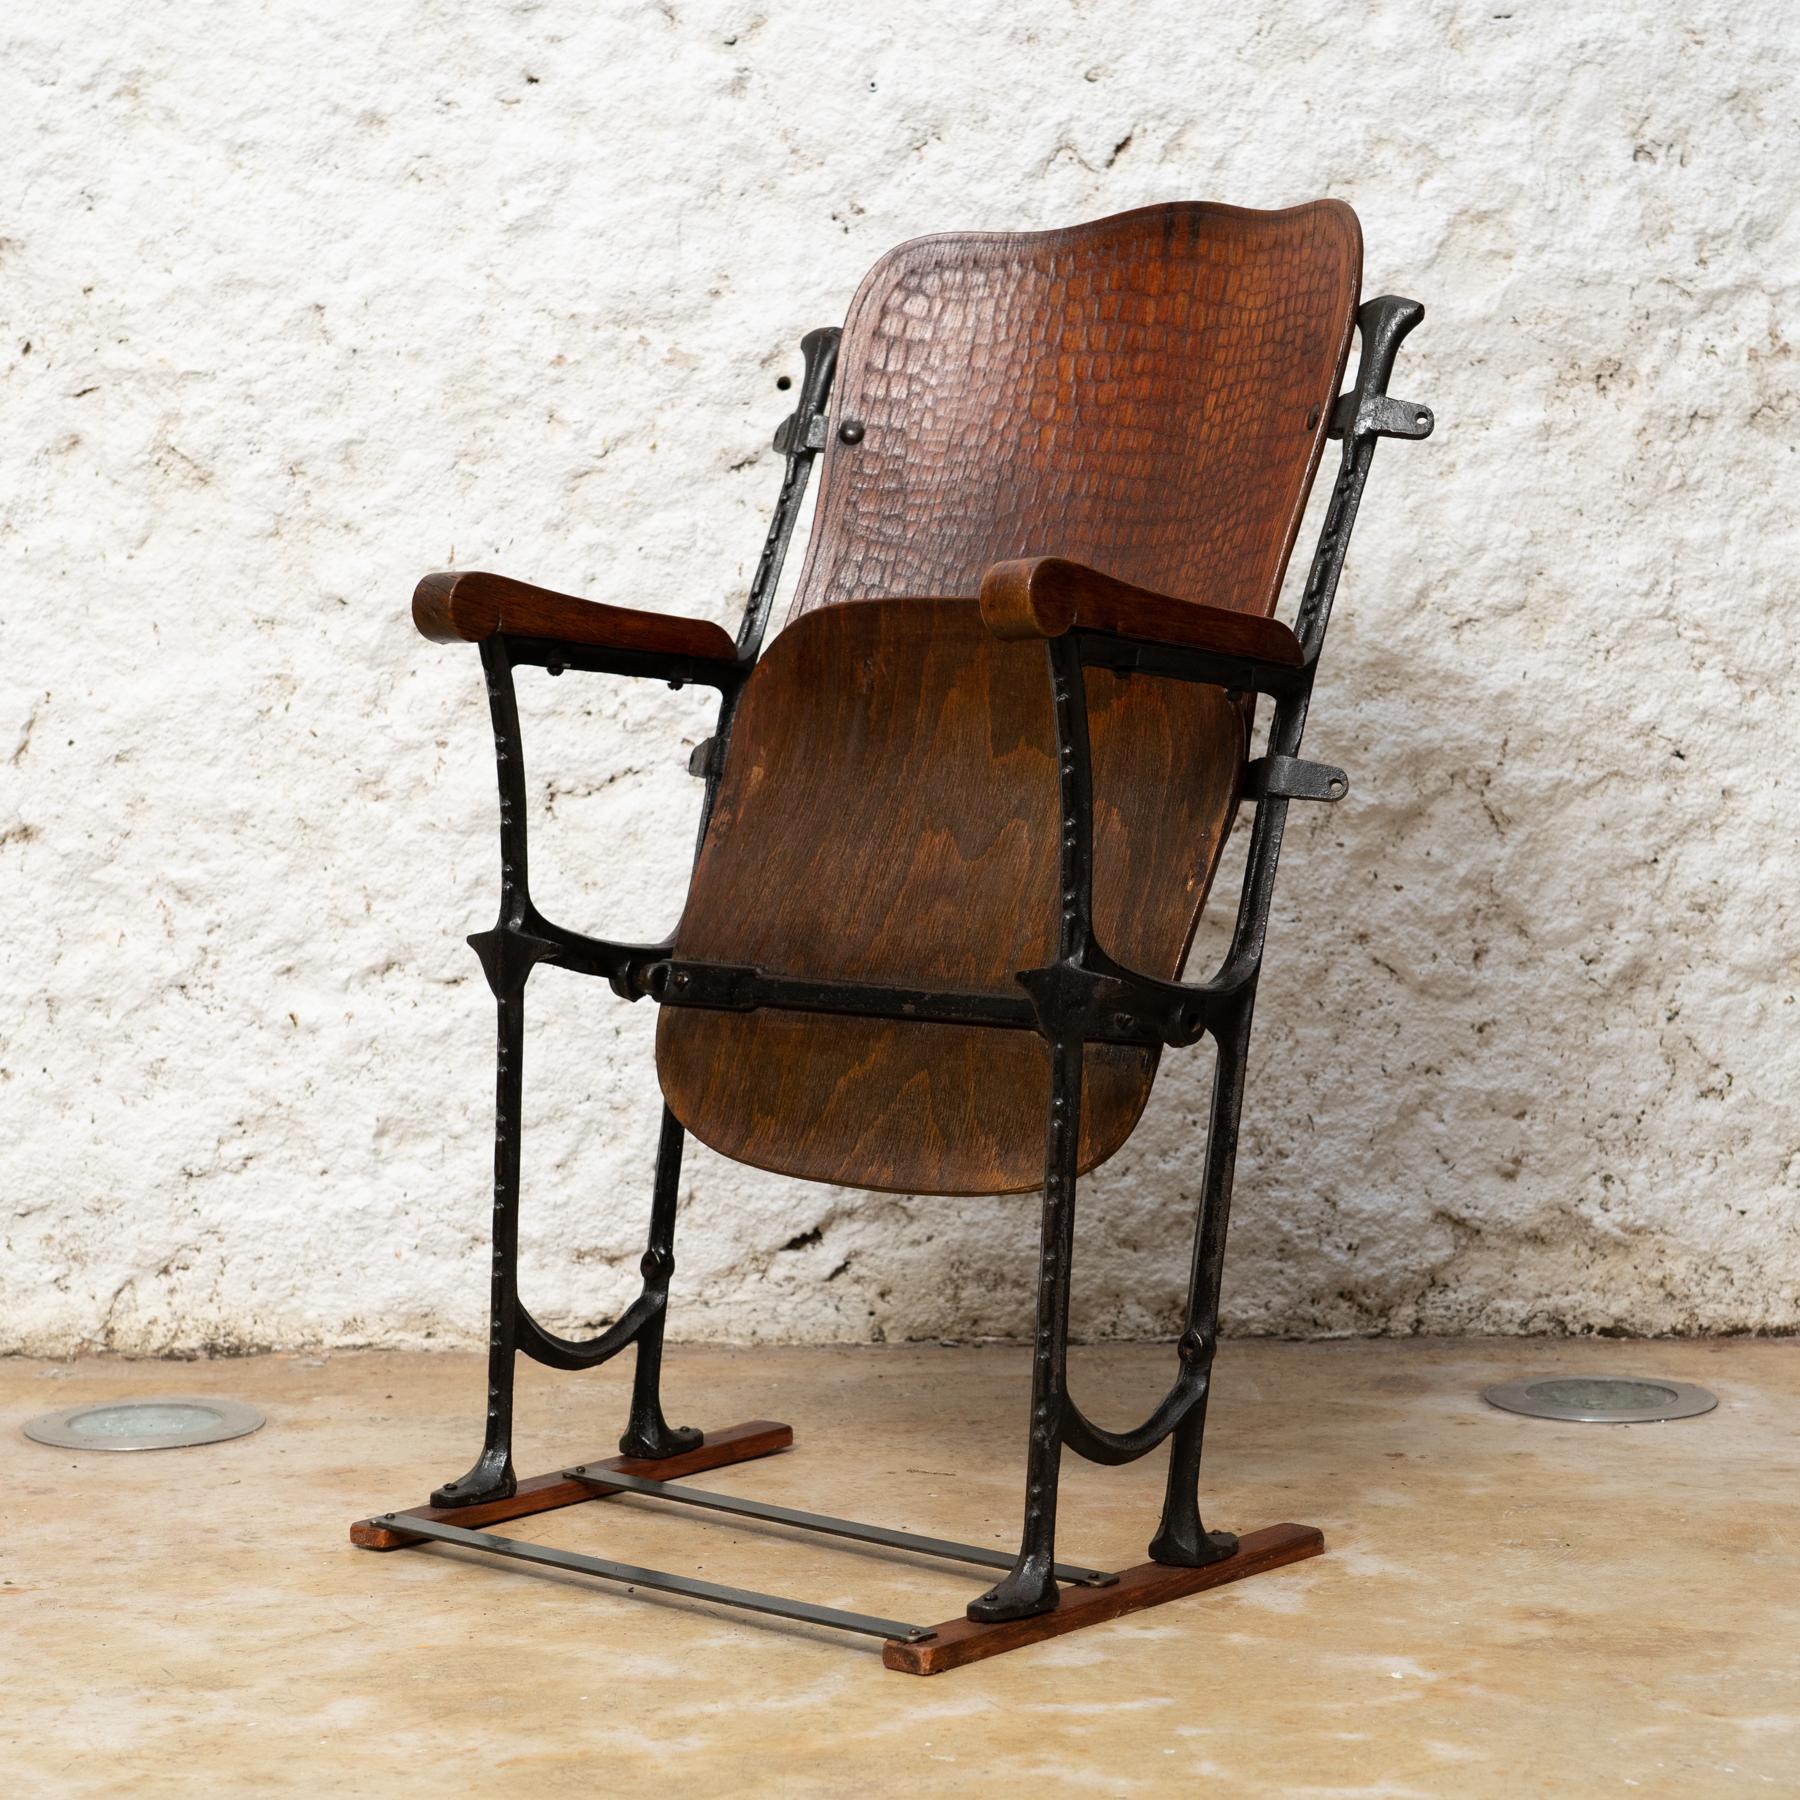 Elegance in Time: Catalan Modernism Theater Chair 'Kursaal', c. 1930 For Sale 1